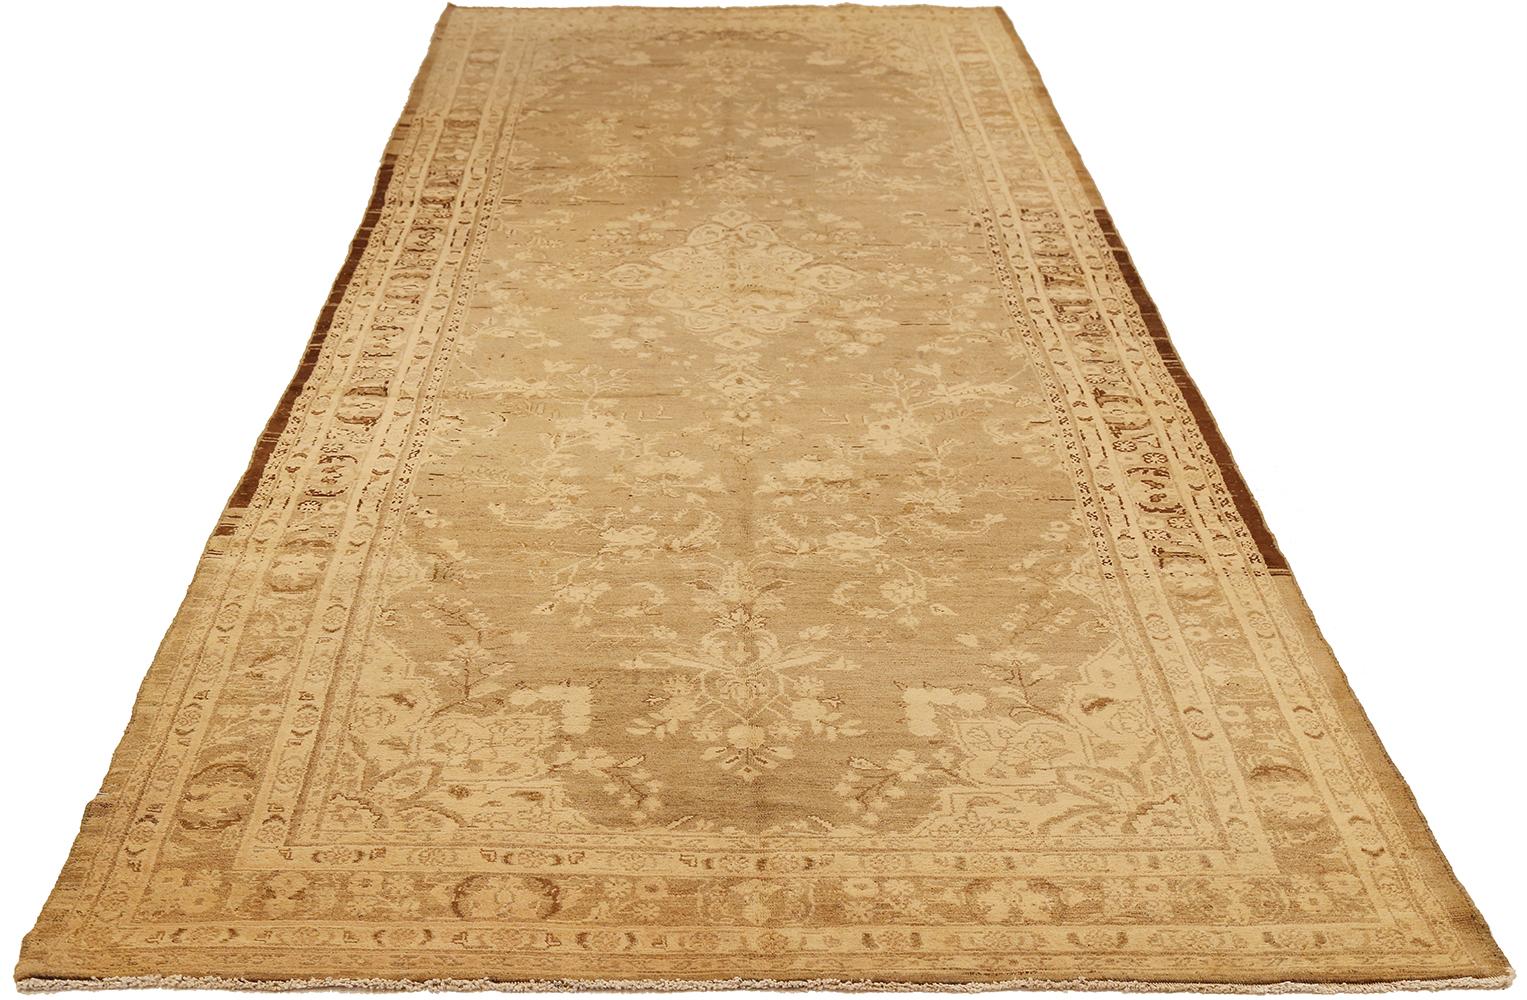 Antique Persian rug handwoven from the finest sheep’s wool and colored with all-natural vegetable dyes that are safe for humans and pets. It’s a traditional Malayer design featuring ivory and brown botanical details on mixed ivory and beige field.